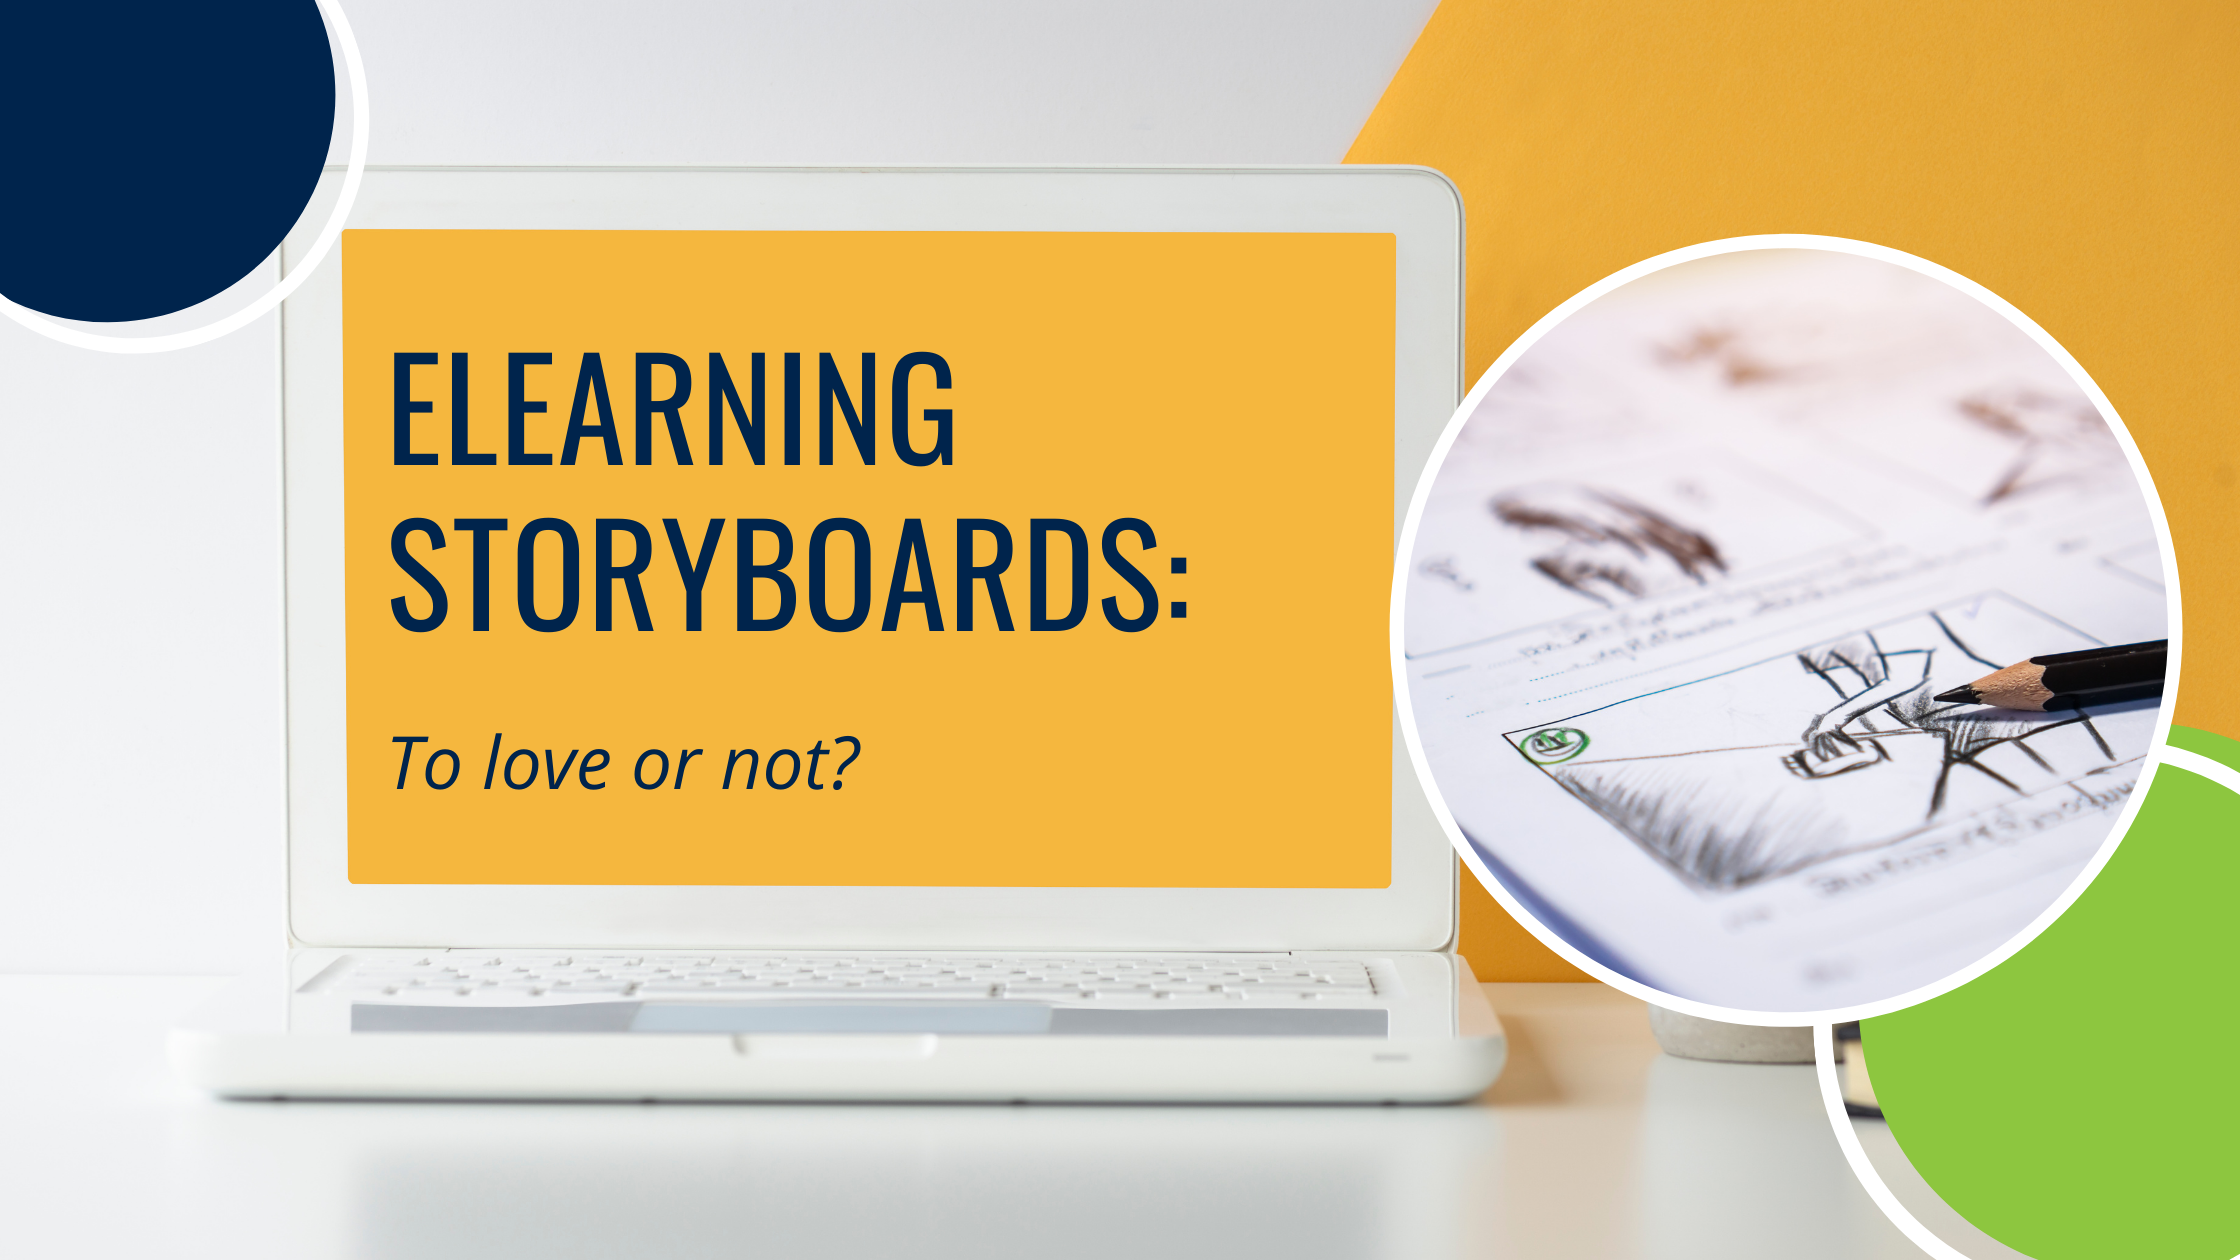 eLearning Storyboards: To Love or Not?